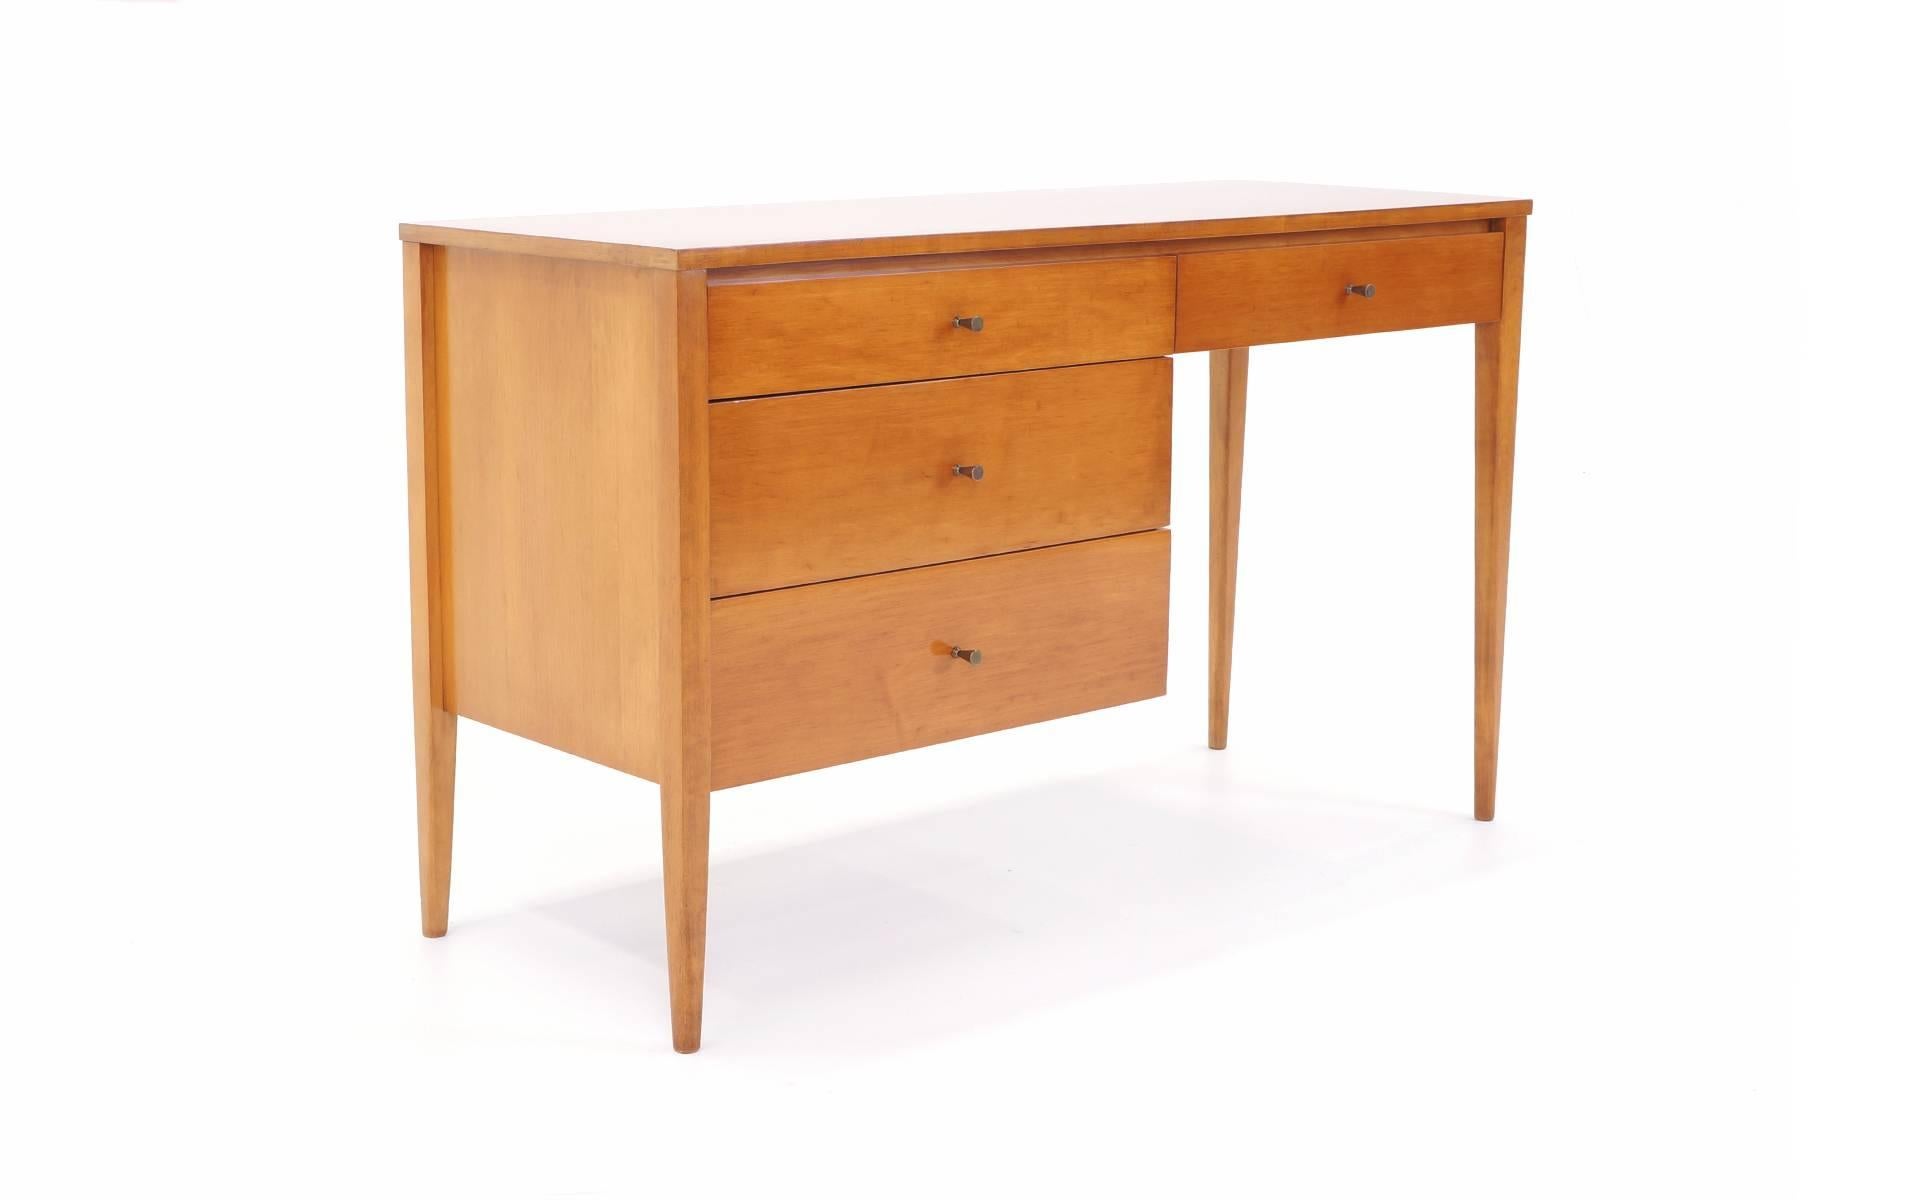 Excellent smaller scale Paul McCobb desk with the original pulls and in excellent condition.